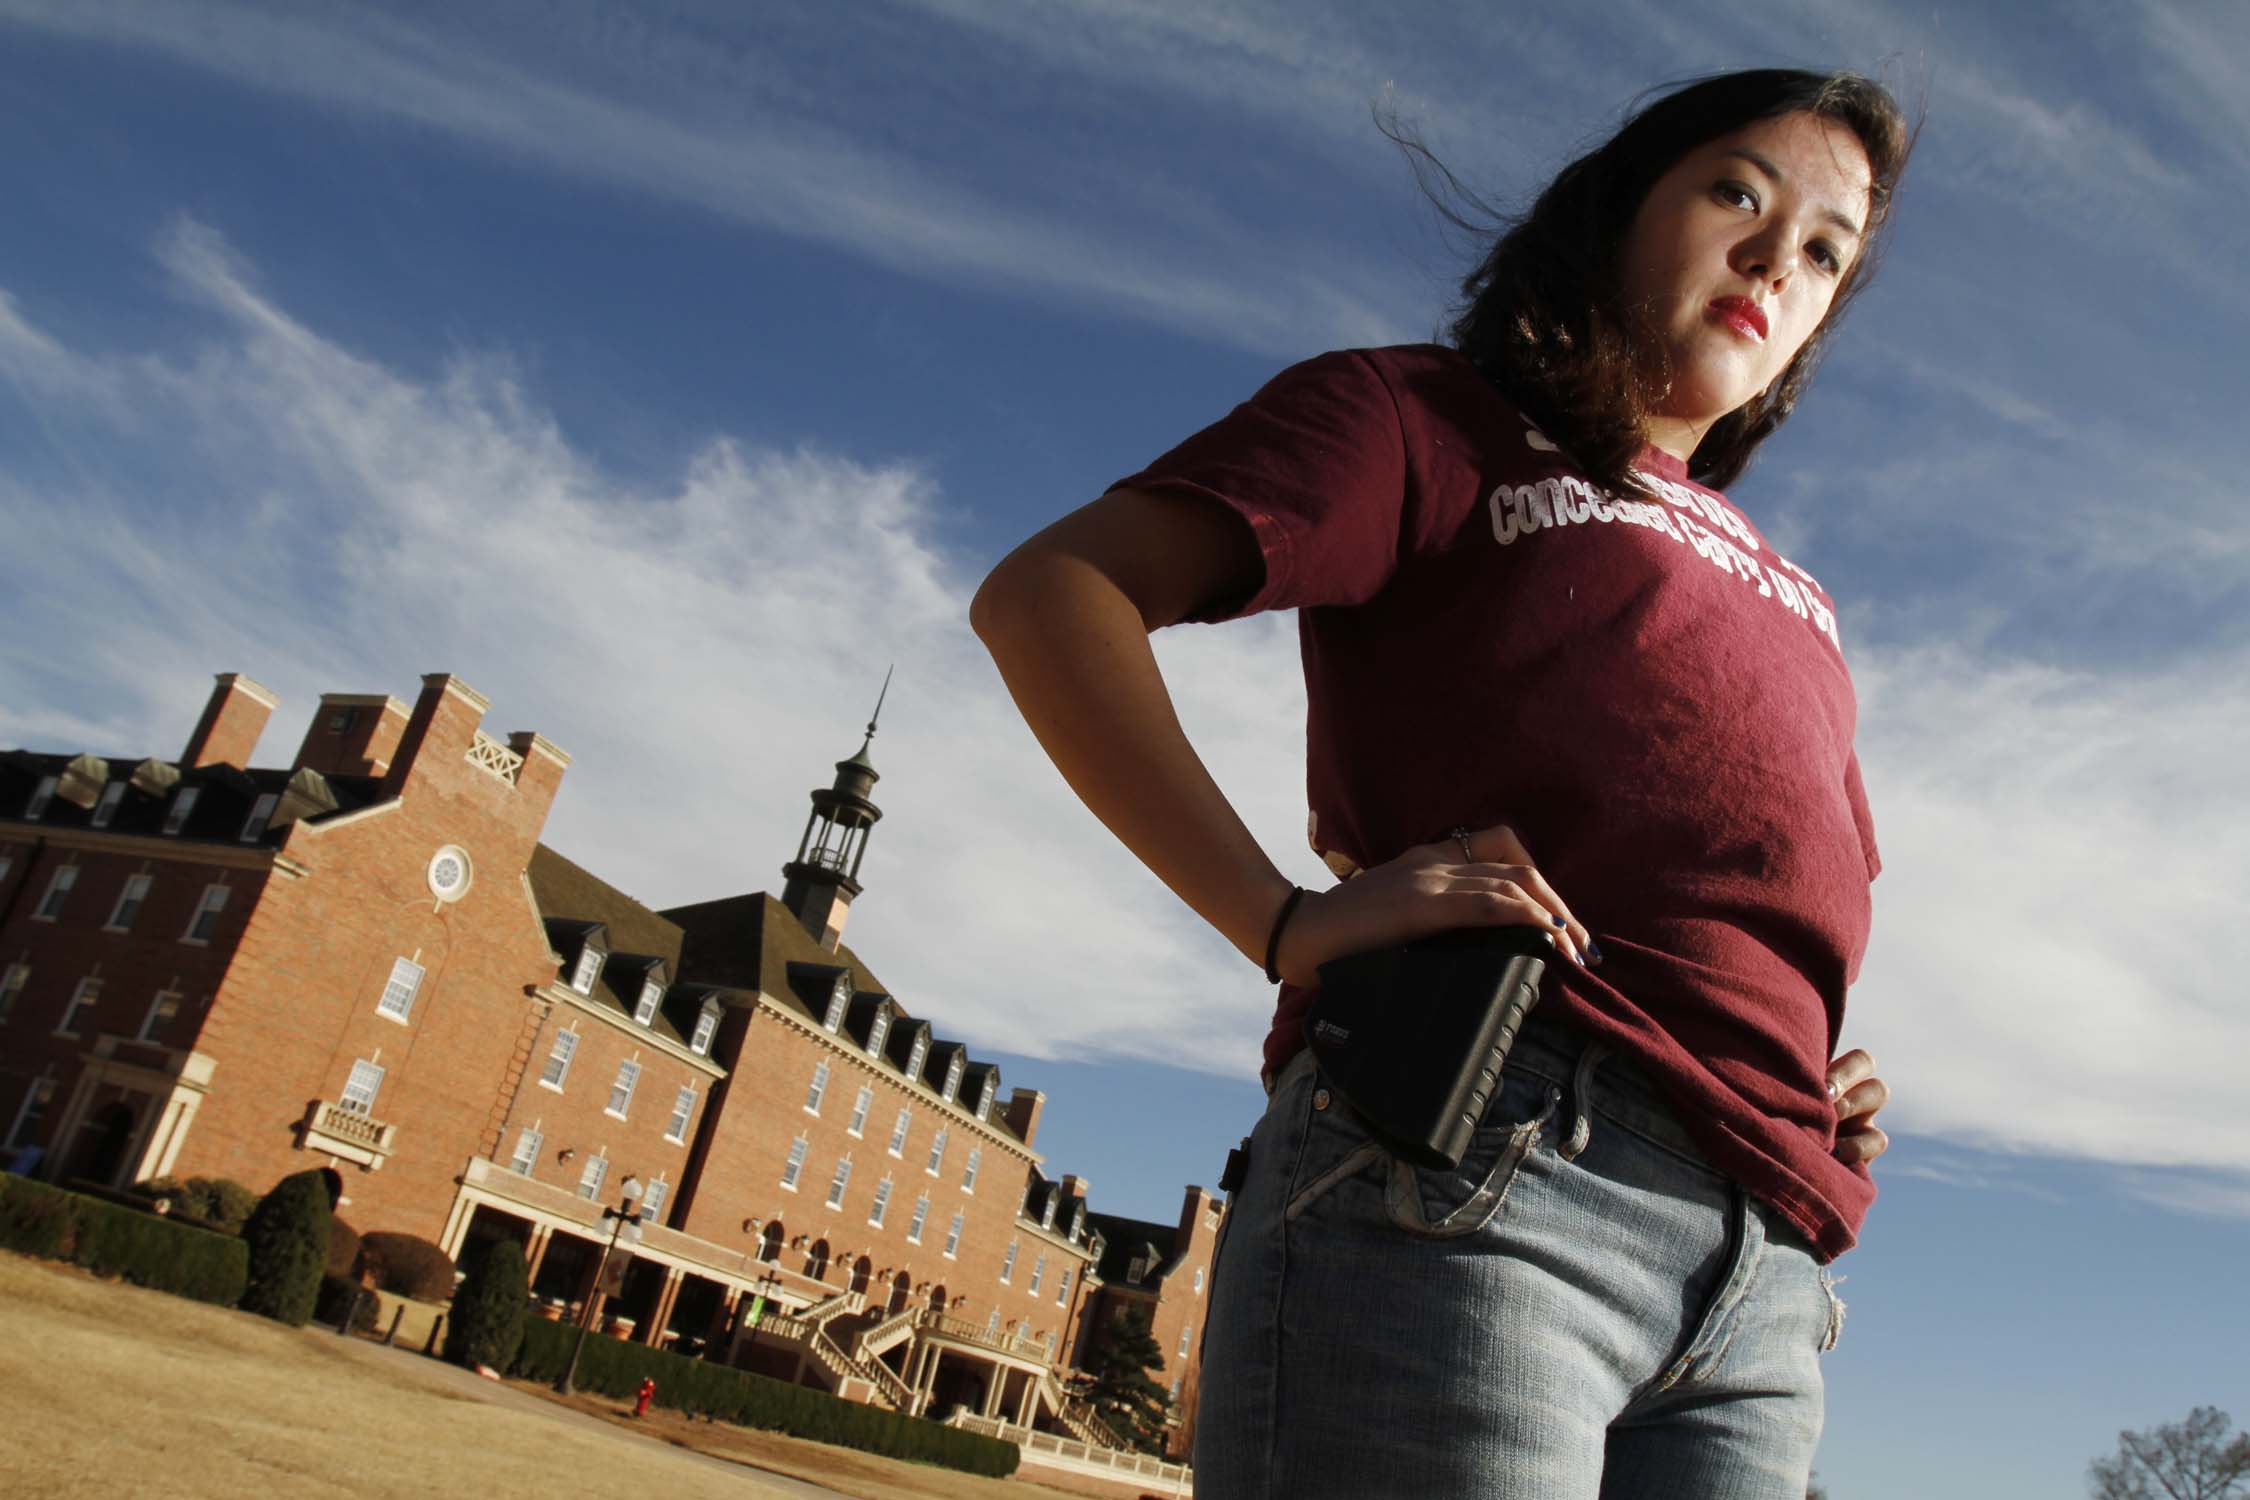 Campus Carry: A Young Woman's Perspective - USA Carry